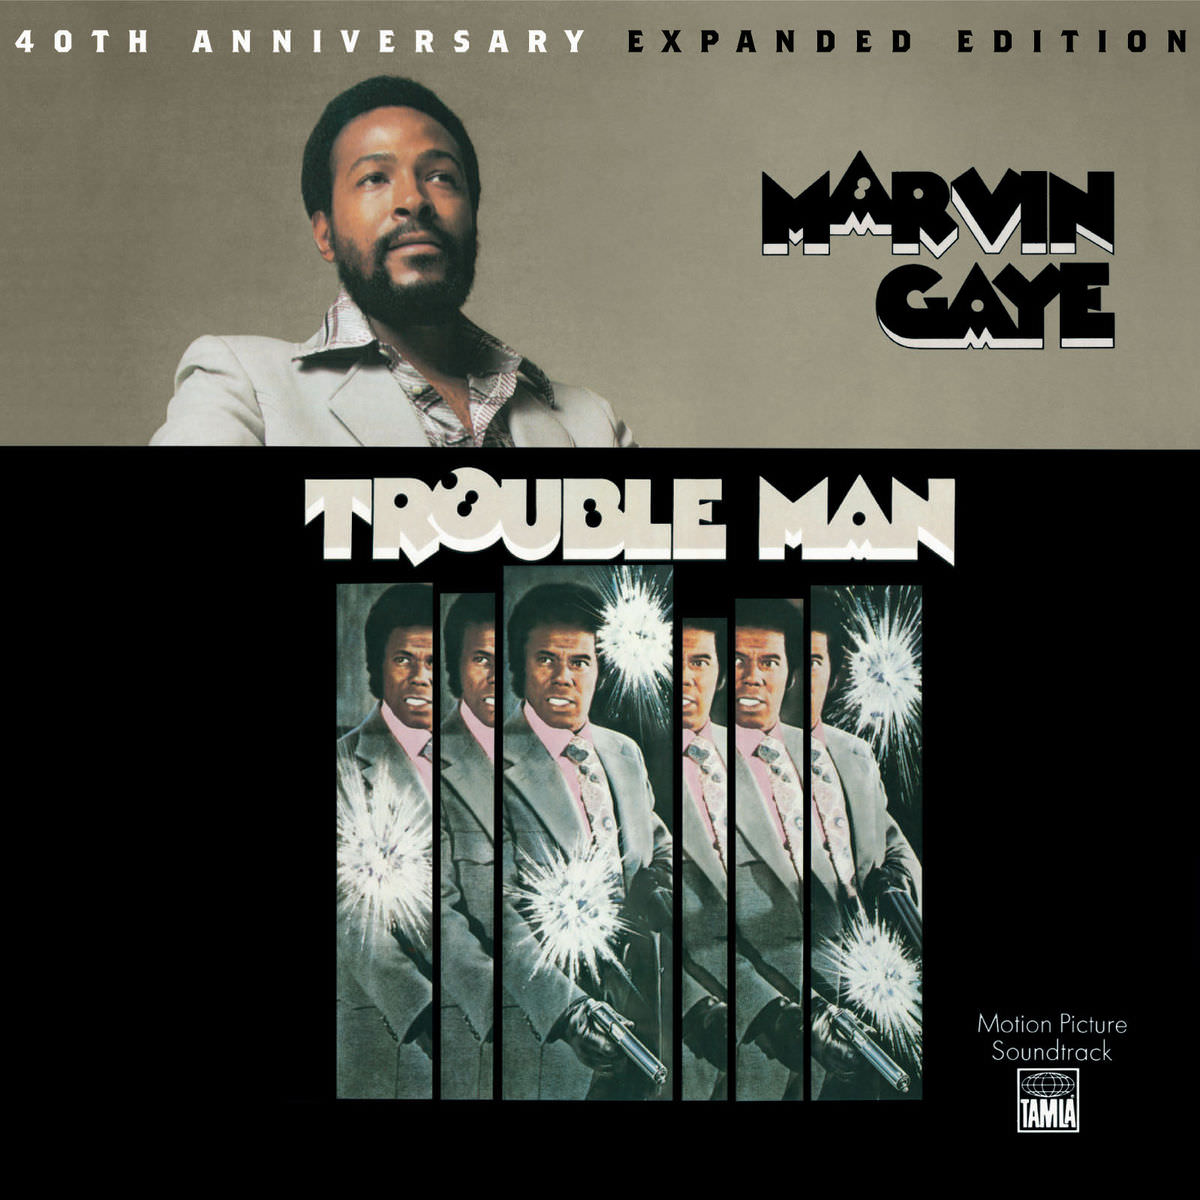 Marvin Gaye - Trouble Man (40th Anniversary Expanded Edition) (1972/2016) [FLAC 24bit/96kHz]